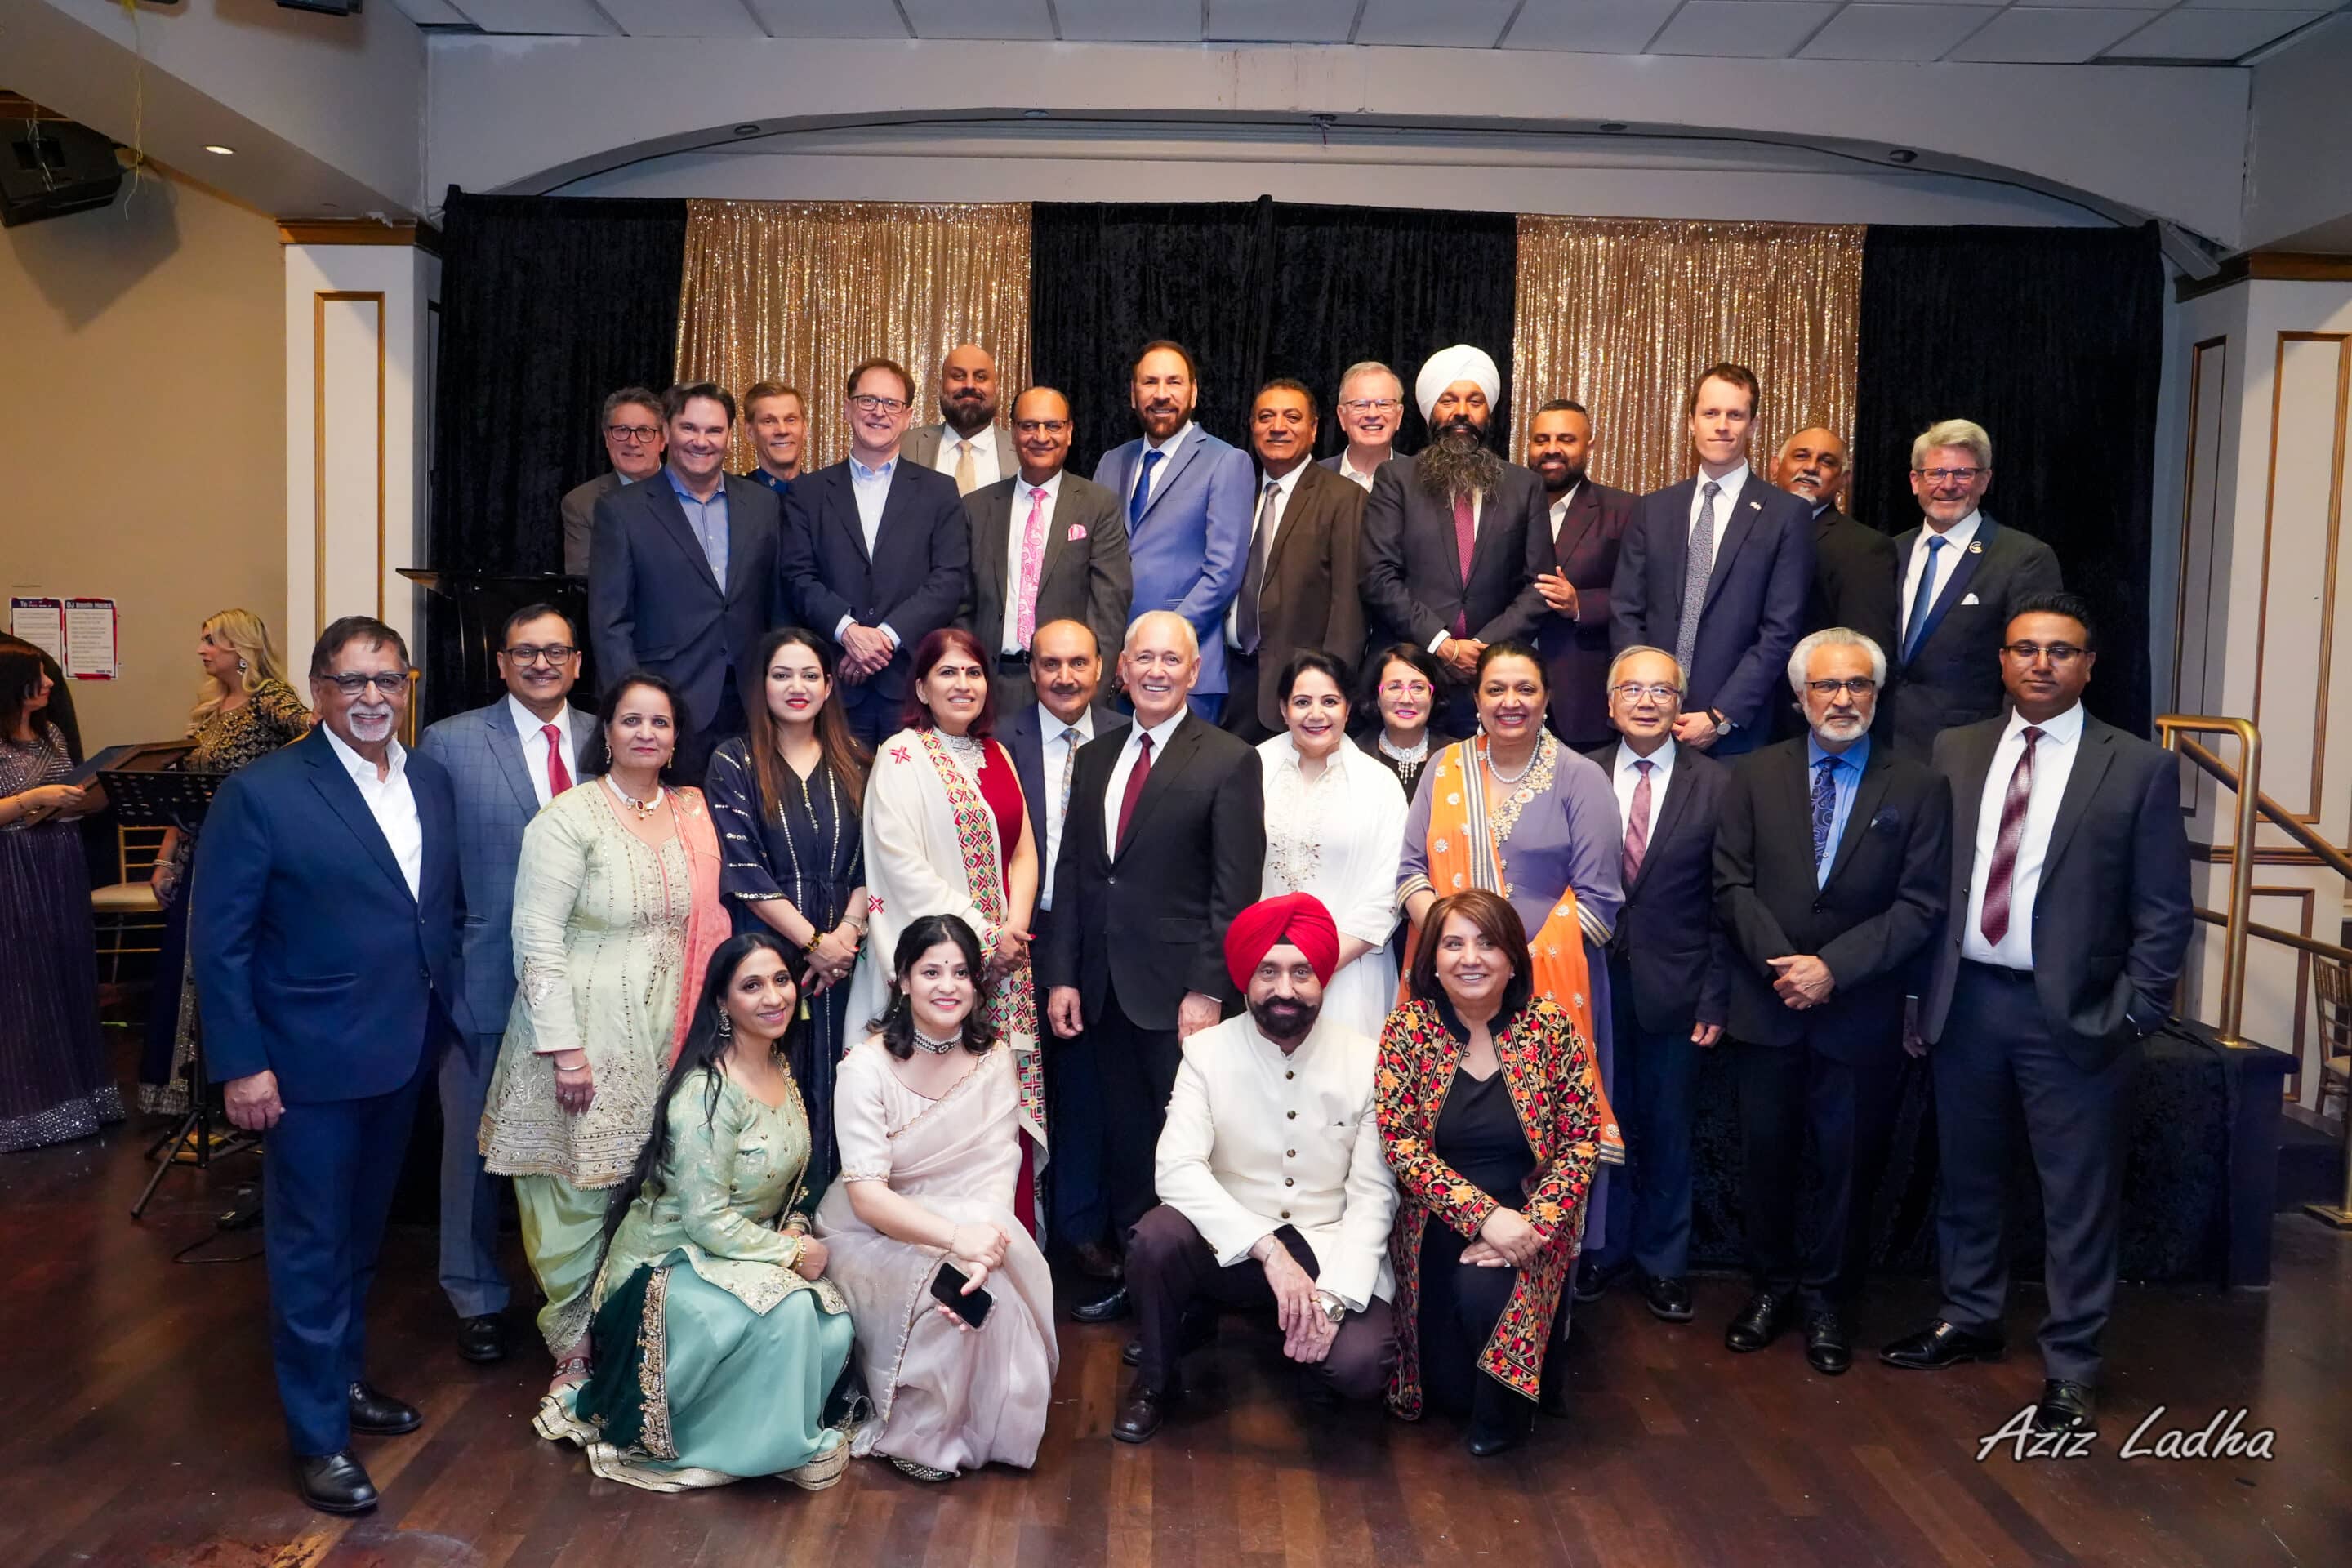 Friends of PICS including Her Honour, the Honourable Janet Austin, Lieutenant Governor of British Columbia, and Honourable David Eby, Premier of British Columbia and more